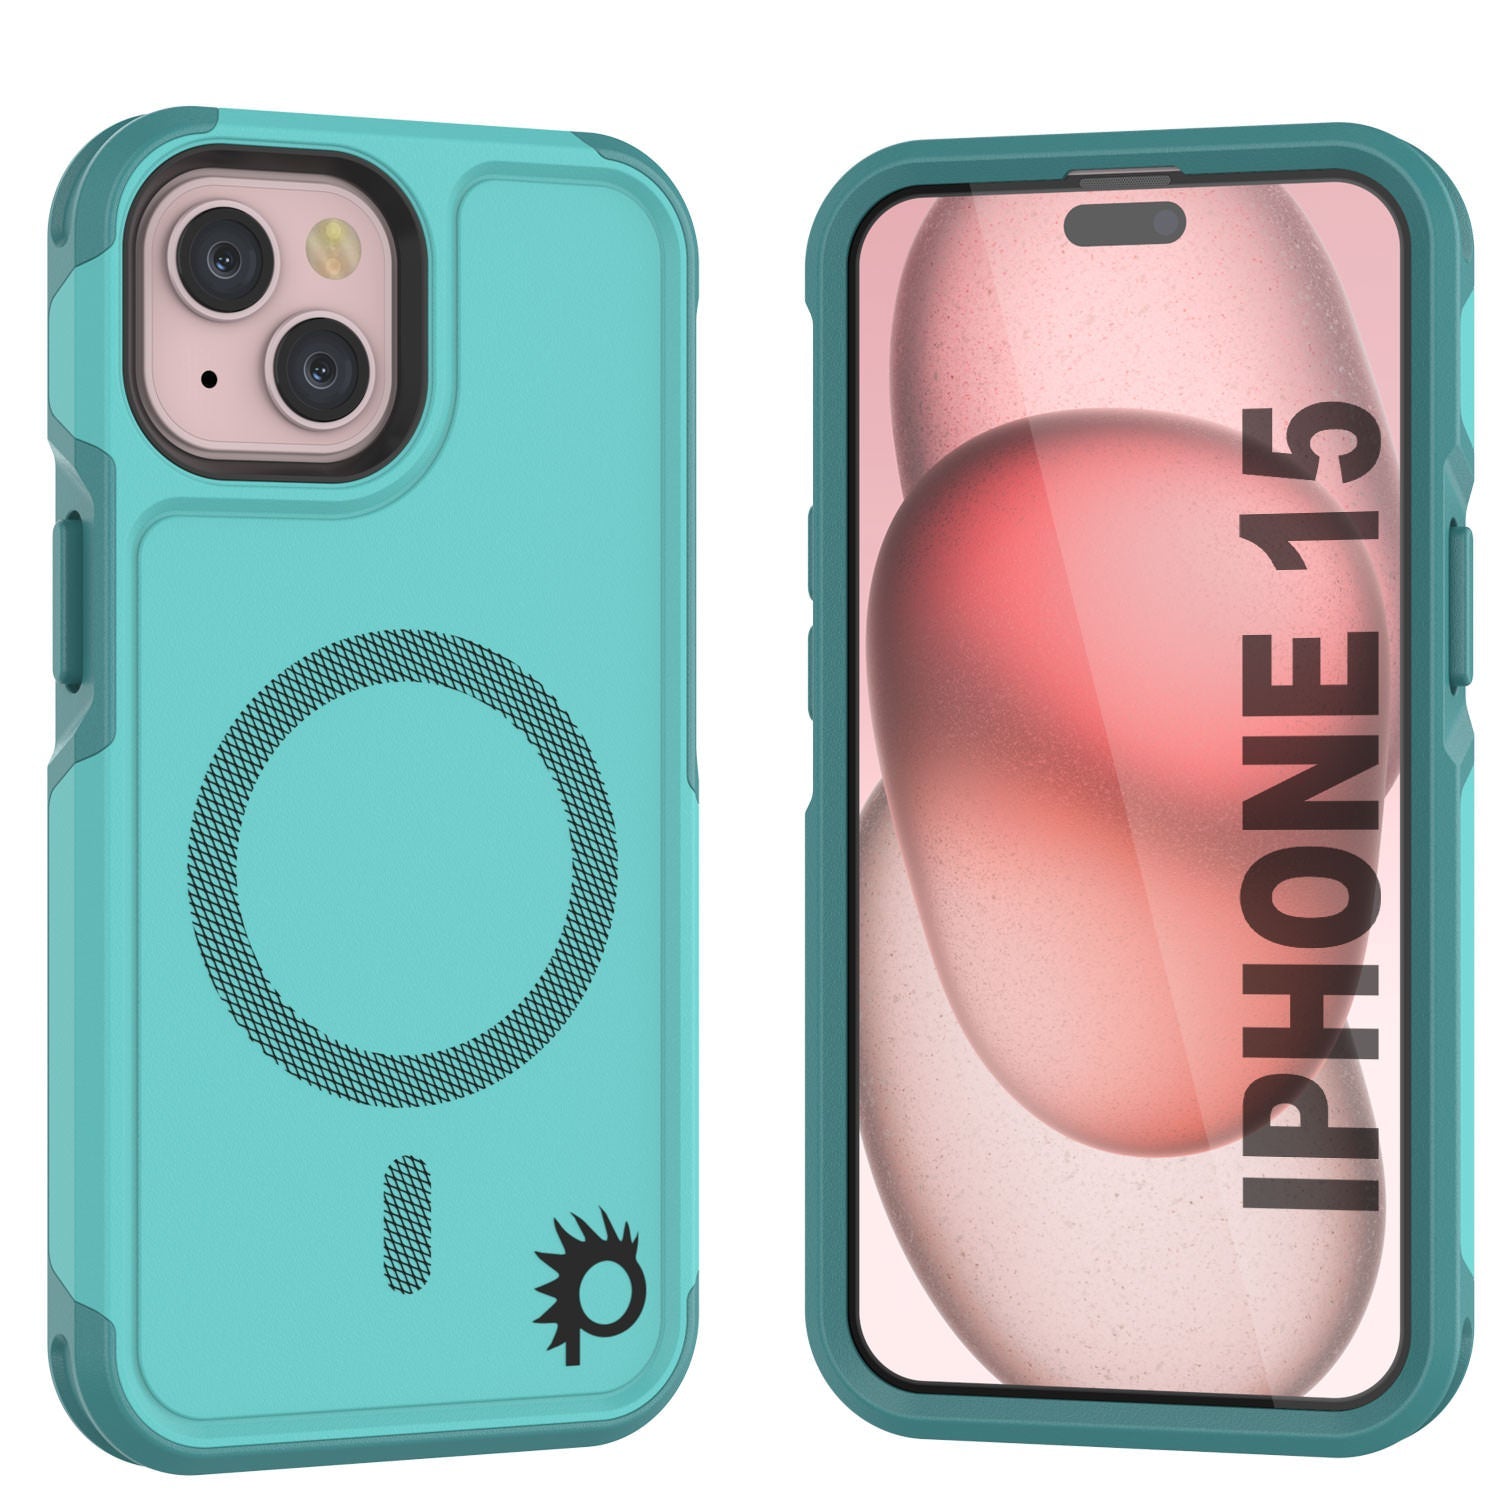 Punkcase iPhone XR Case With Tempered Glass Screen Protector, Holster –  punkcase